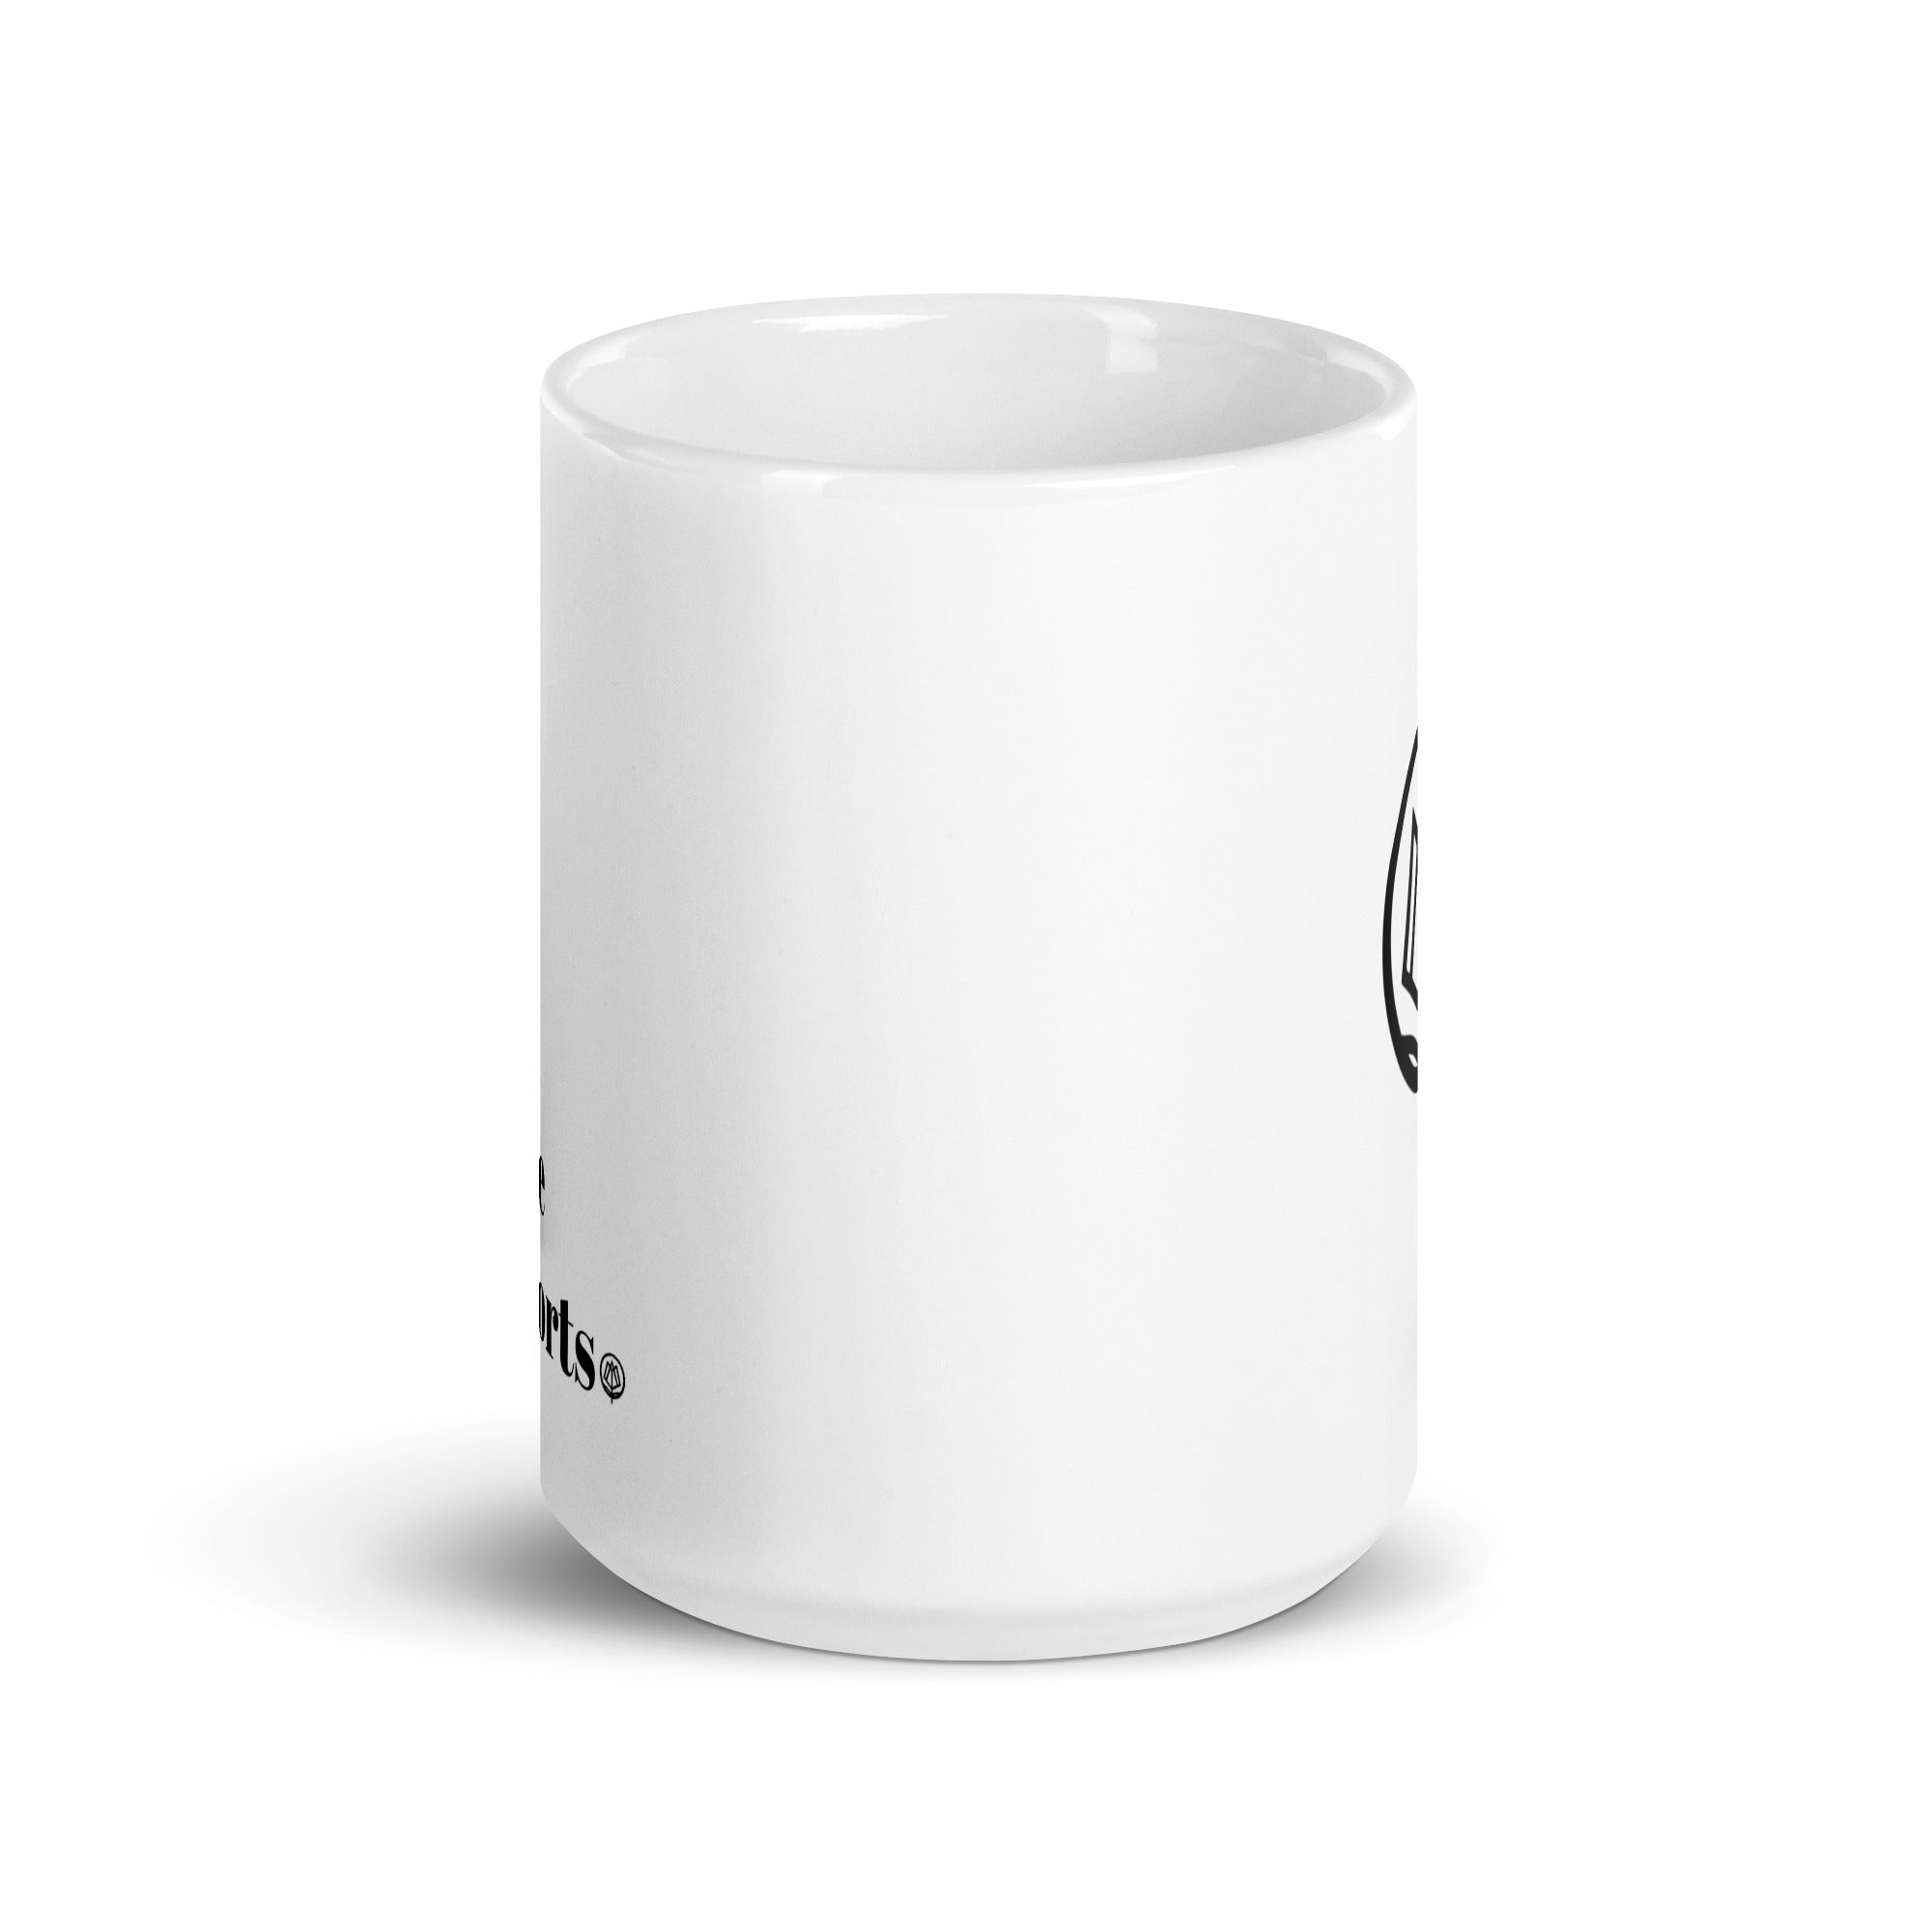 Don't Talk To Me About Sports Mug - White Glossy